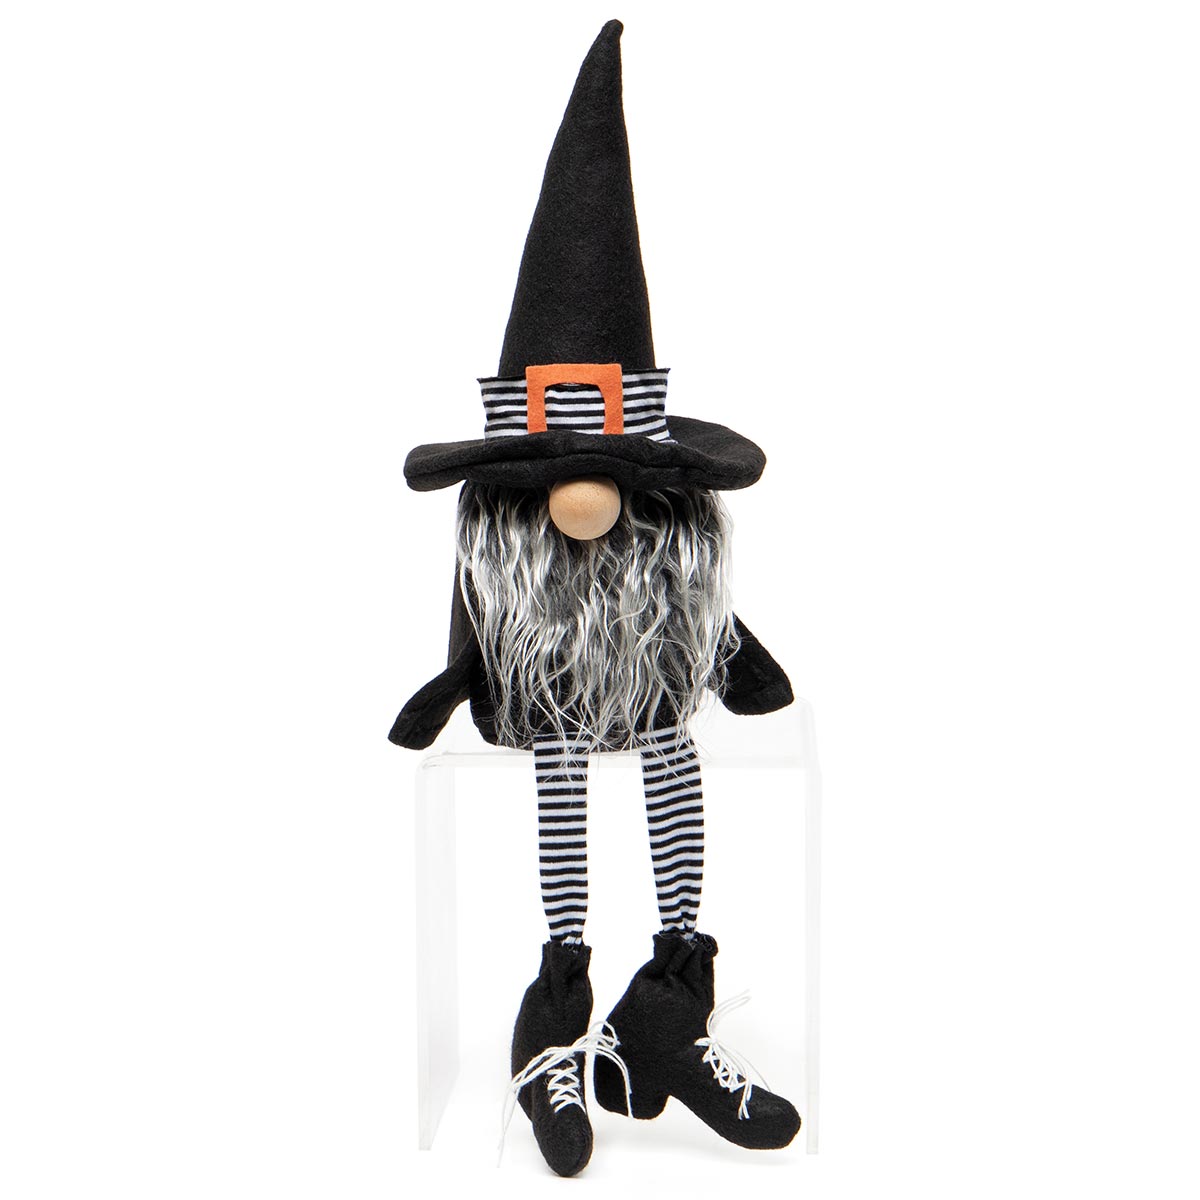 GNOME WITCH WITH FLOPPY LEGS 3.5IN X 3IN X 17IN